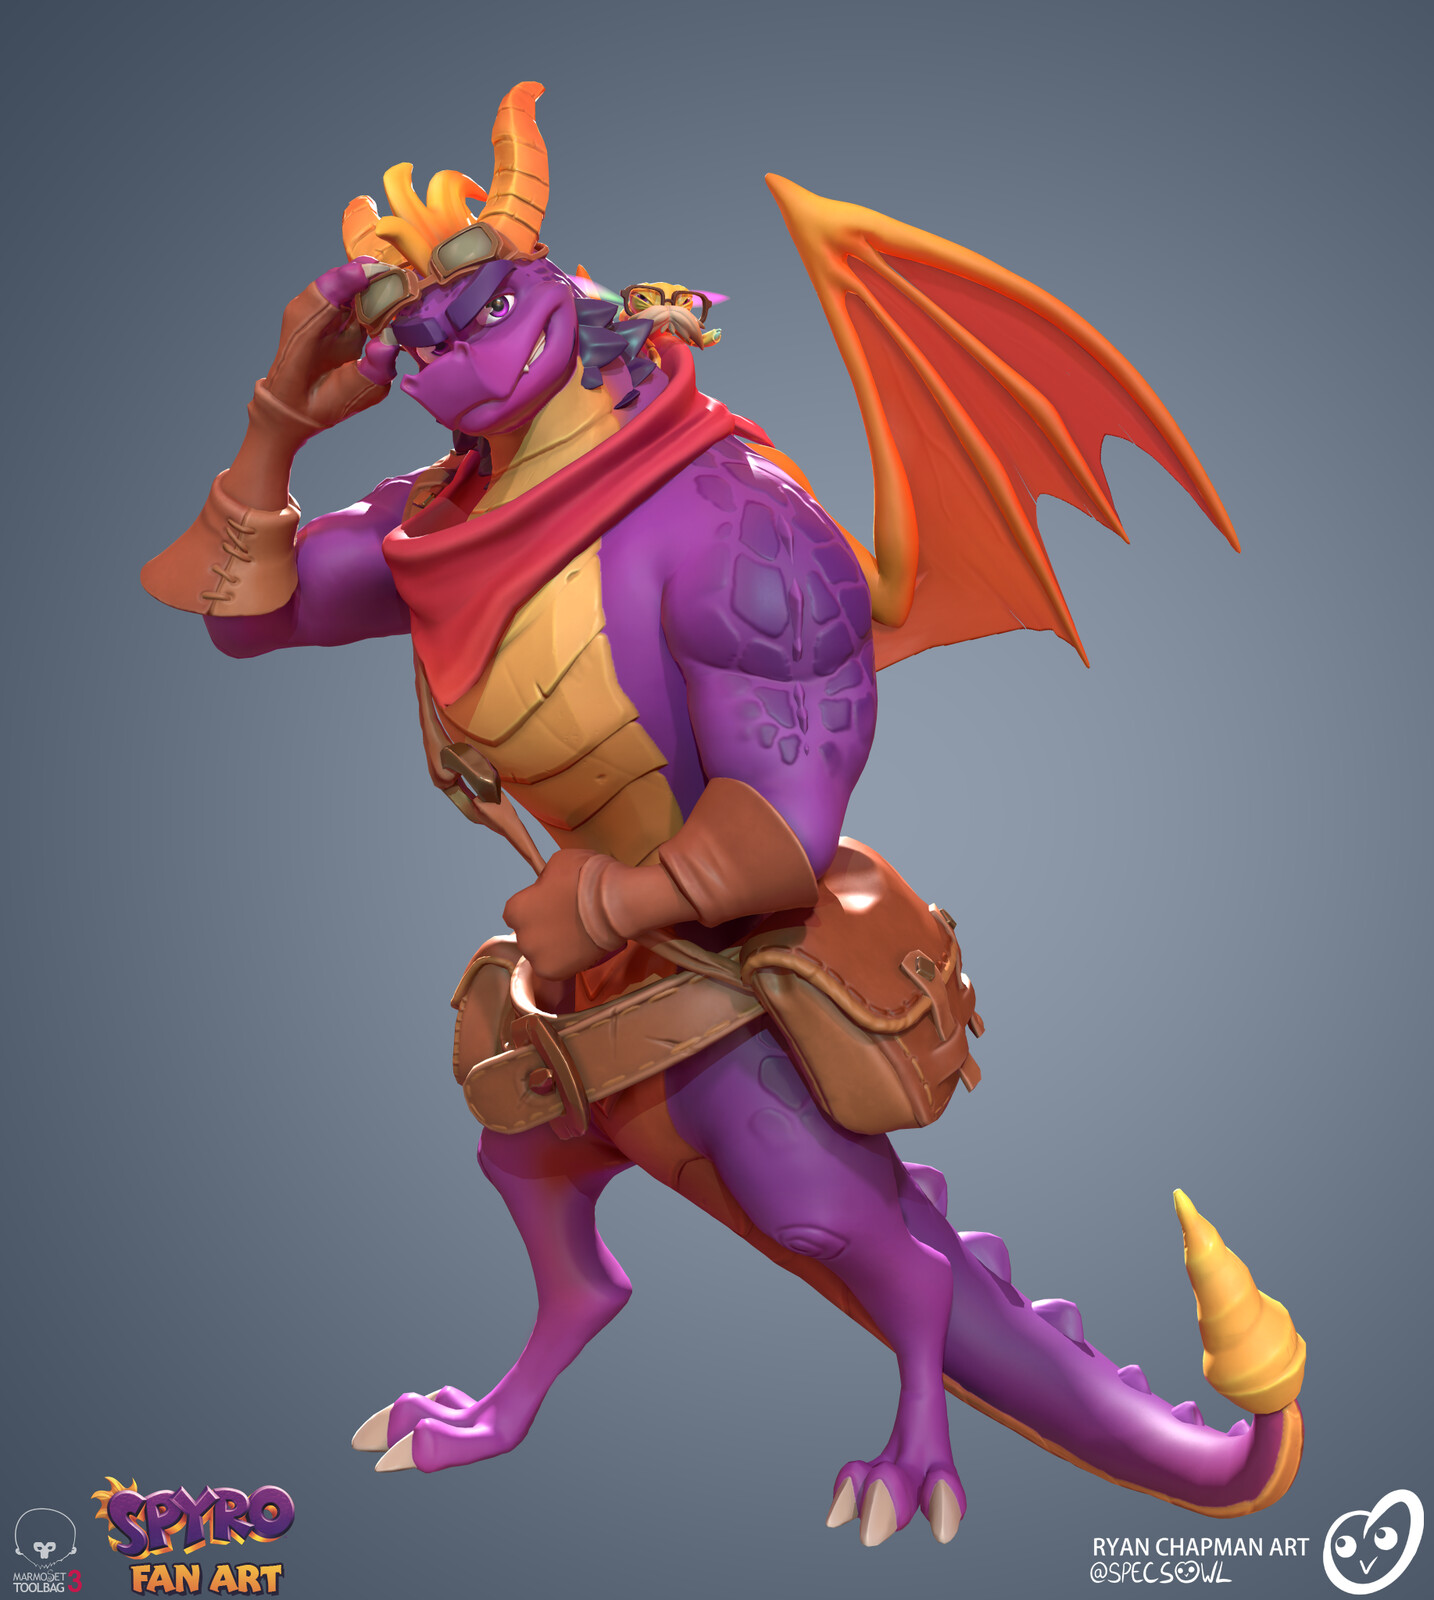 An original pose to show the moodier side of our purple dragon